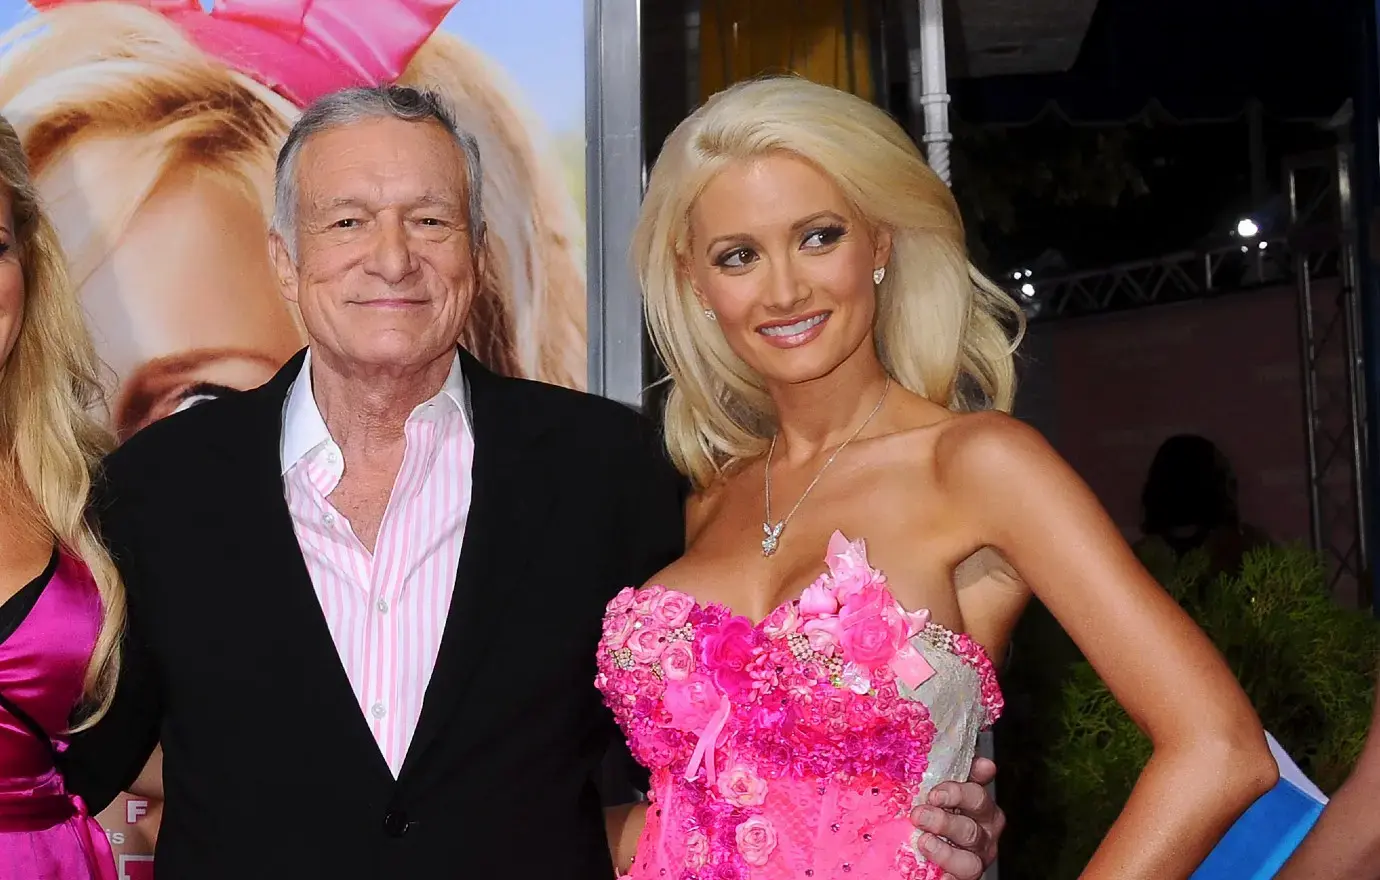 Holly Madison Says Hugh Hefner Wanted Playmates Looking Barely Legal